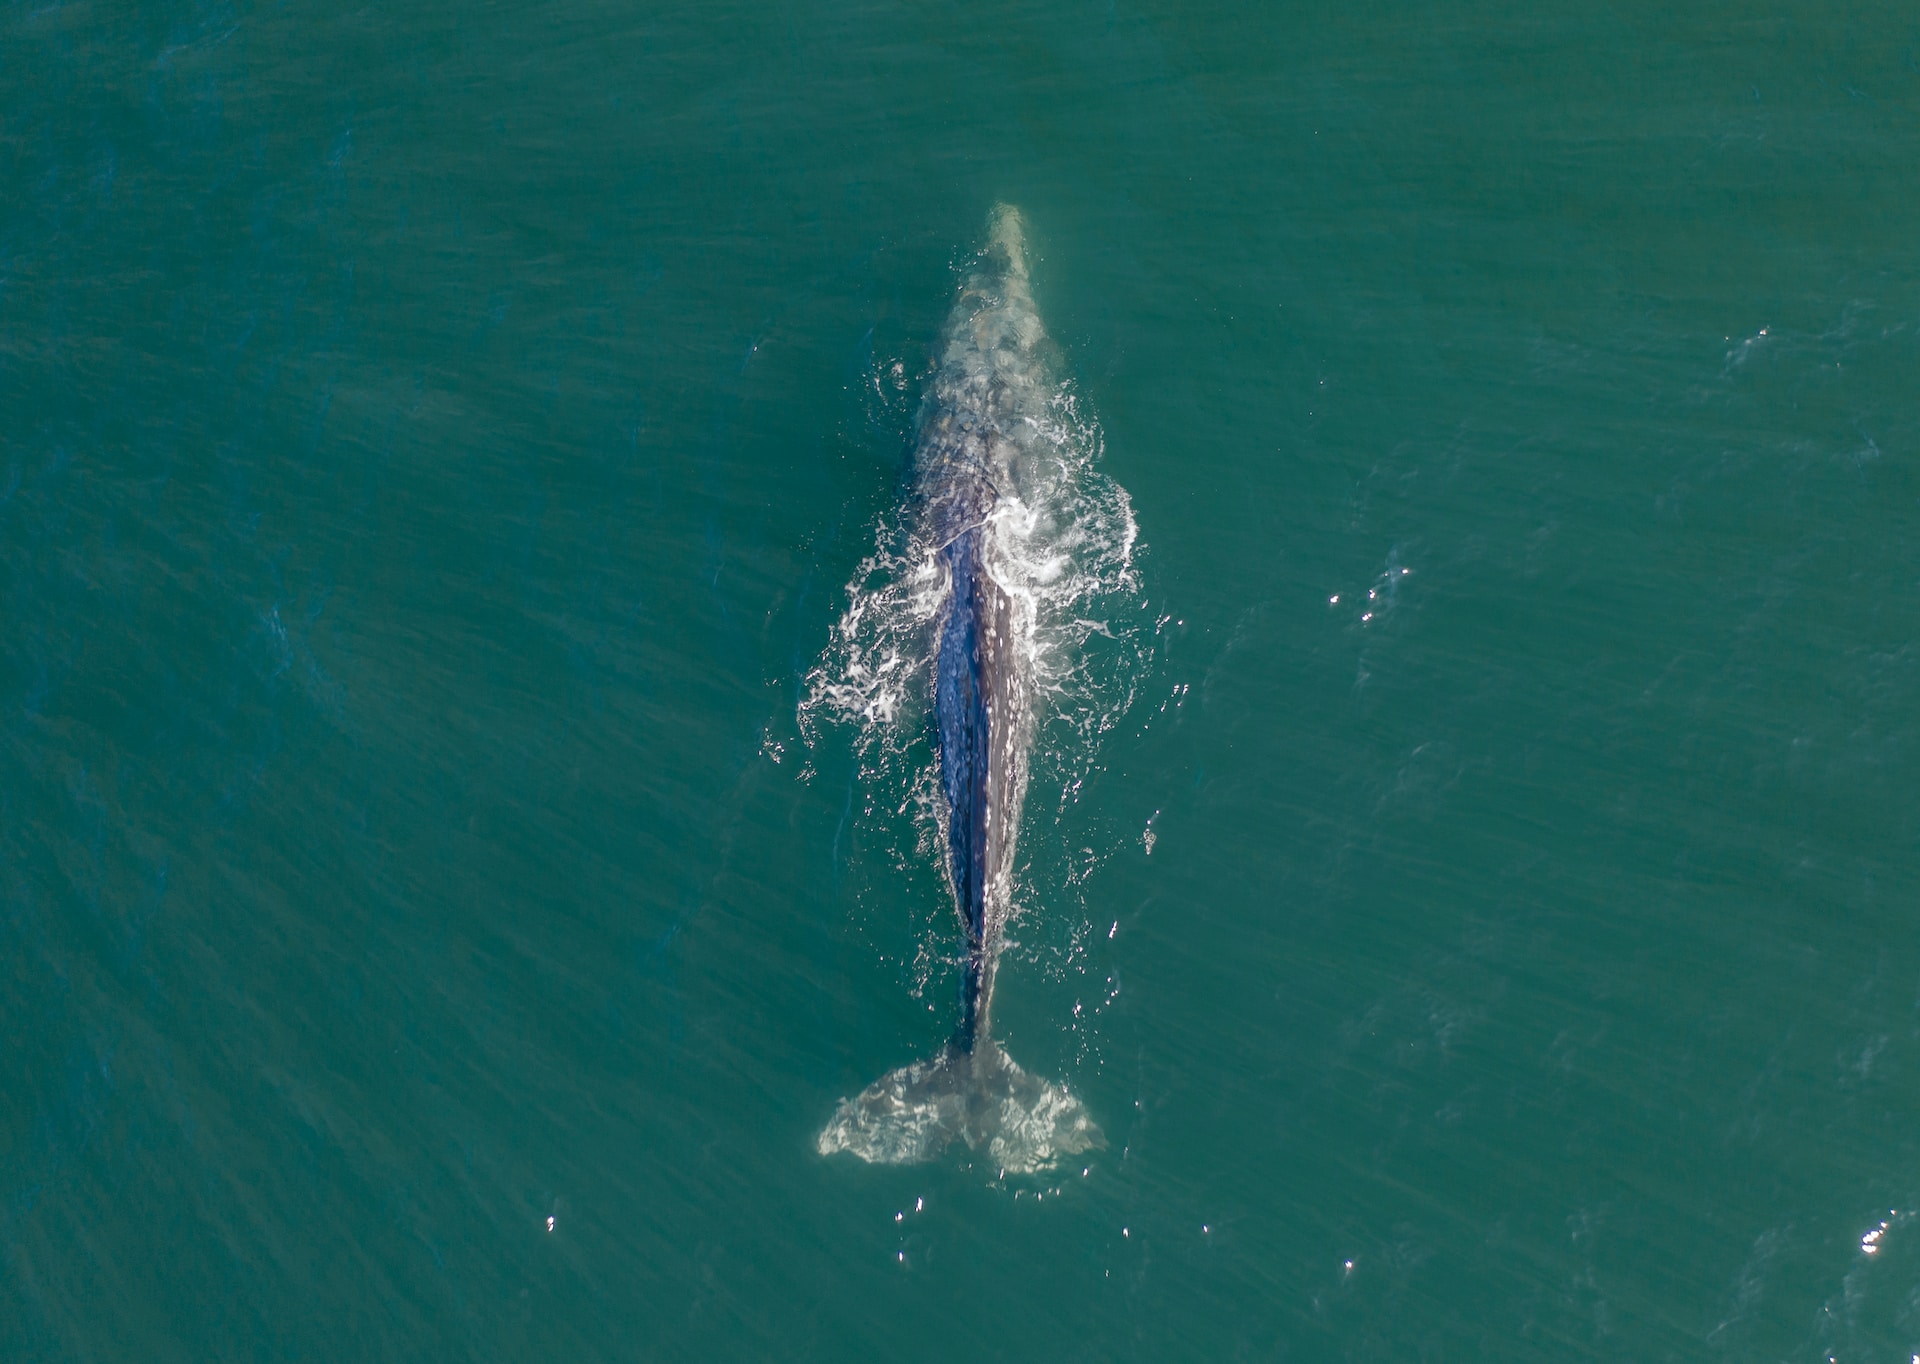 Whale-watching at Cabrillo National Monument